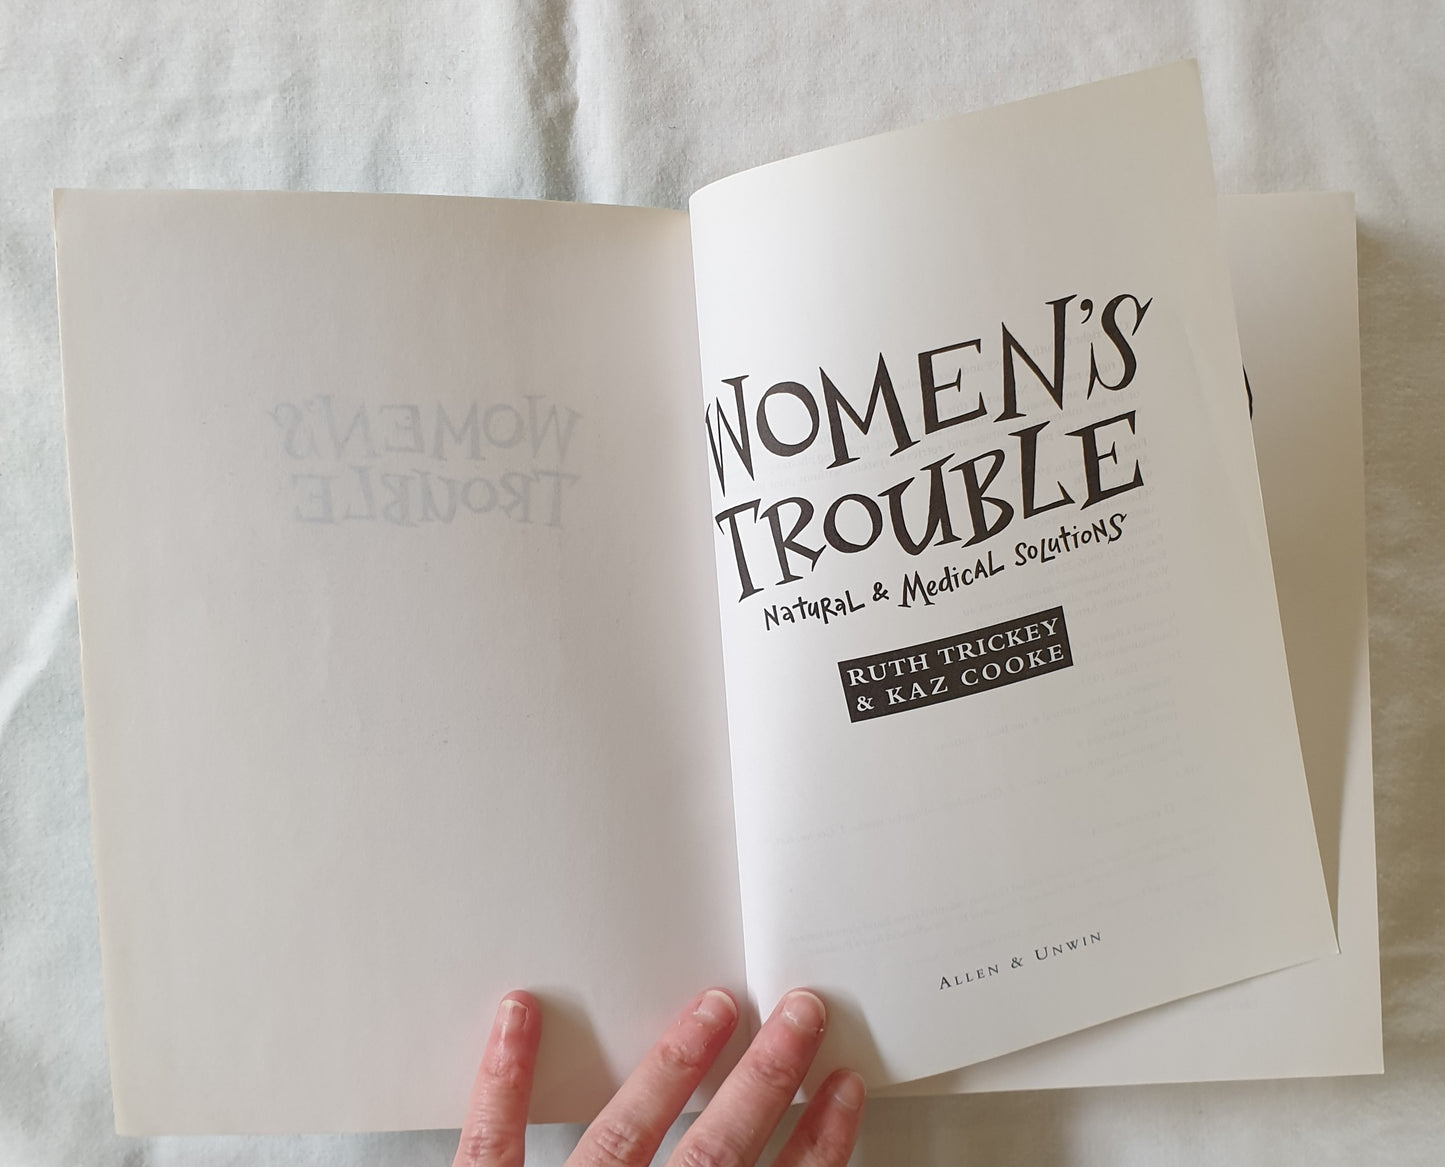 Women’s Trouble by Ruth Trickey and Kaz Cooke